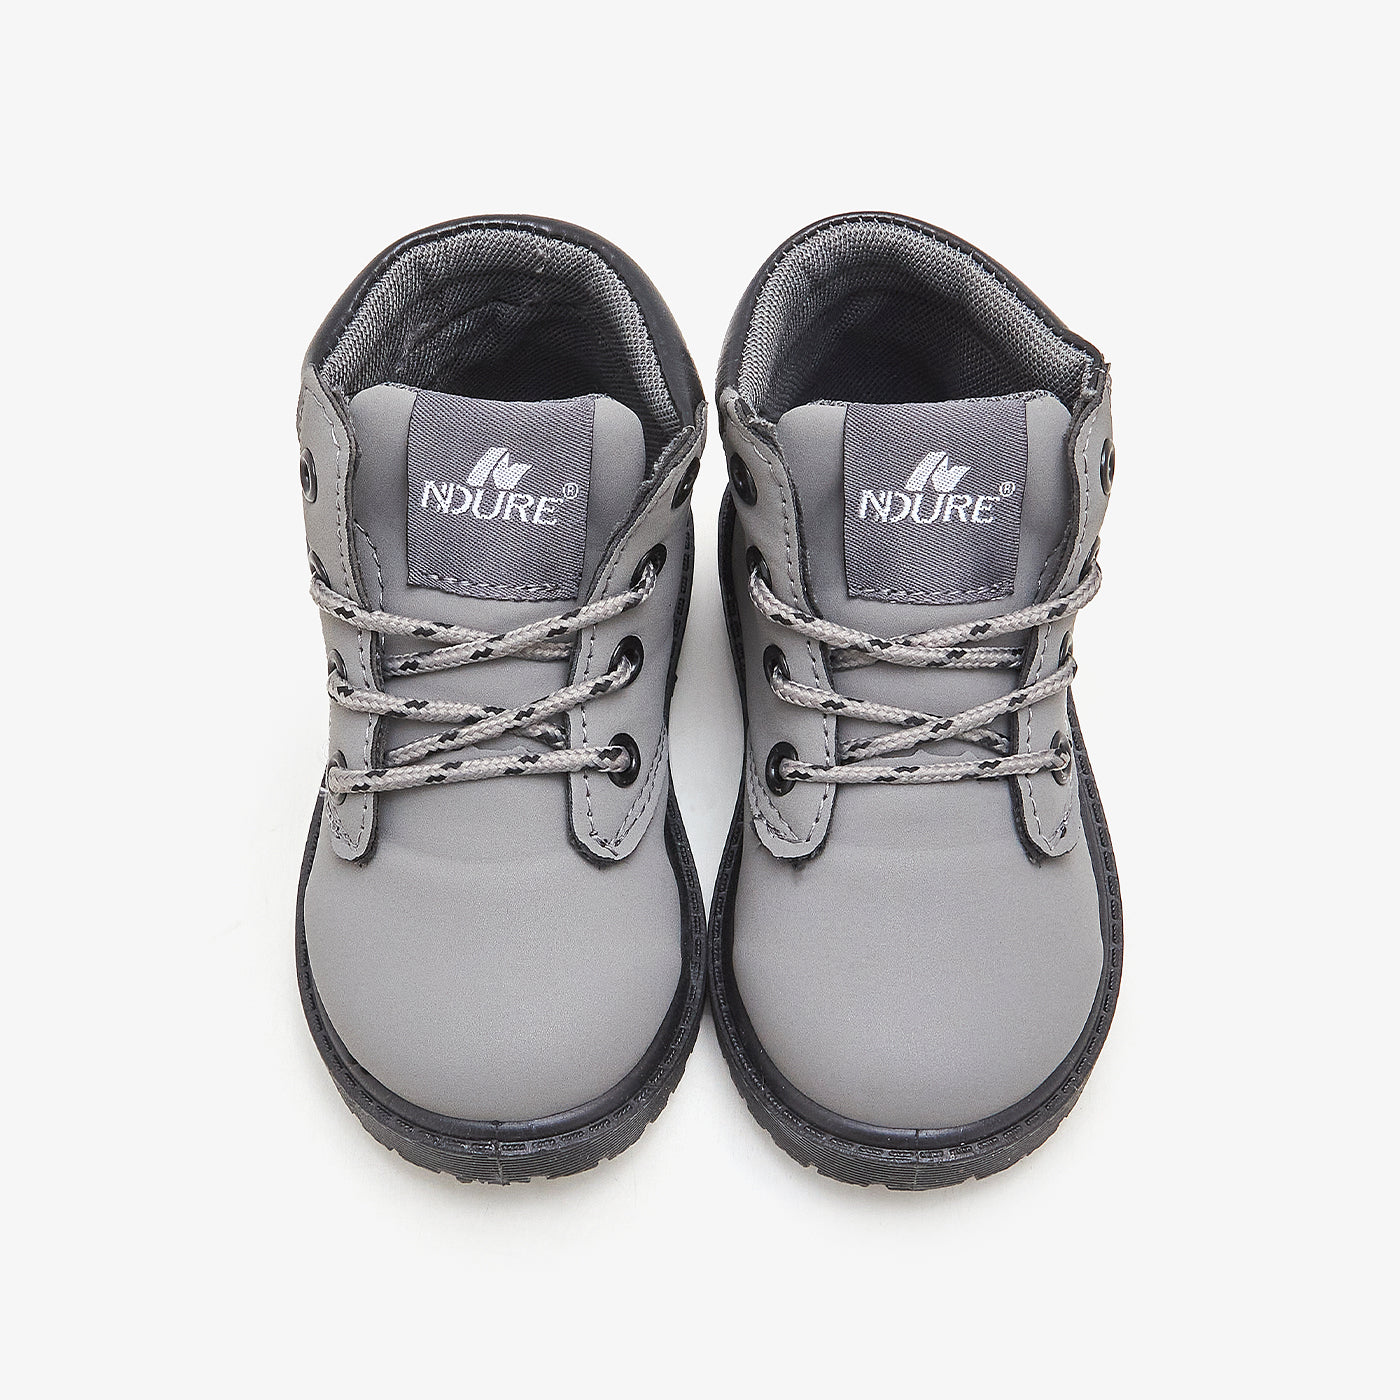 Winter Boots for Boys